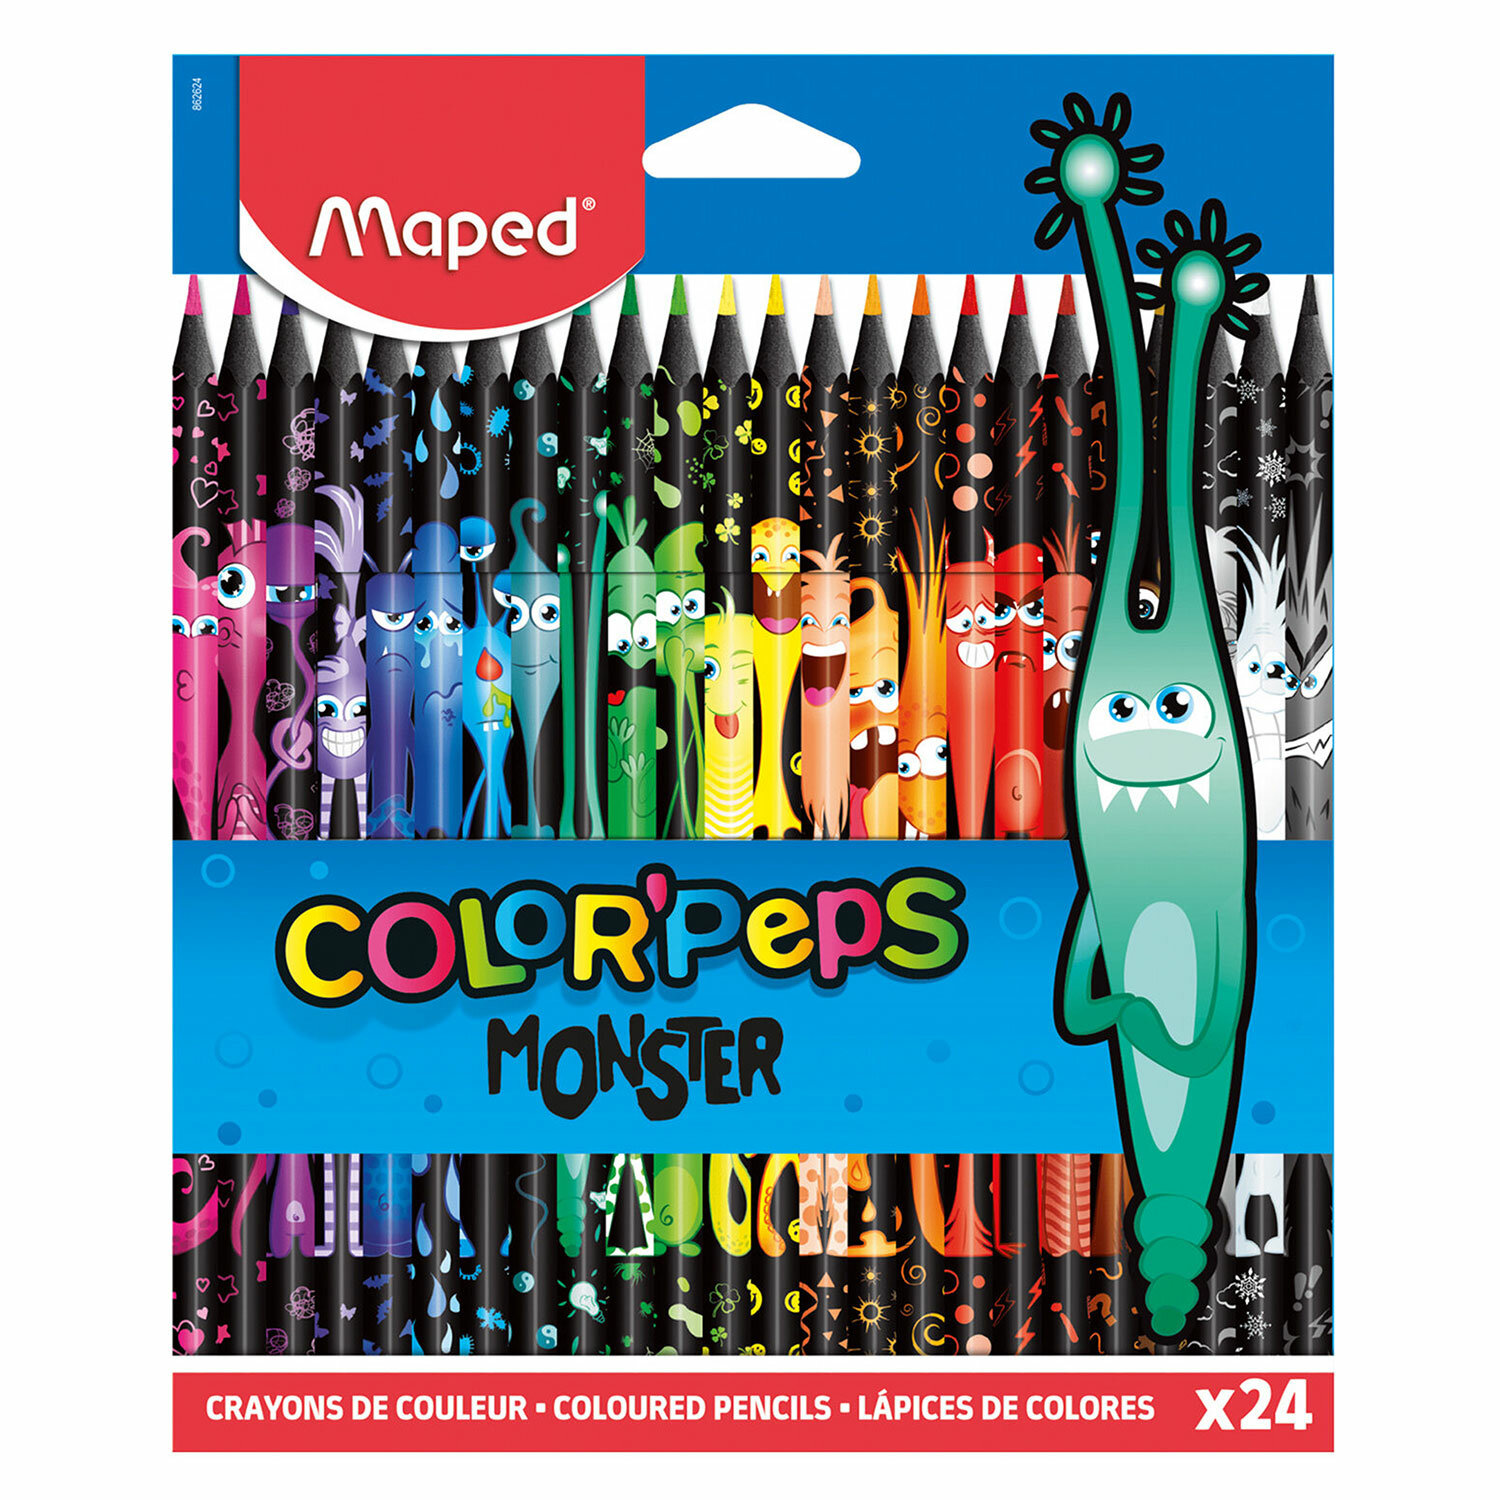   MAPED 862624 COLOR PEP'S Black Monster